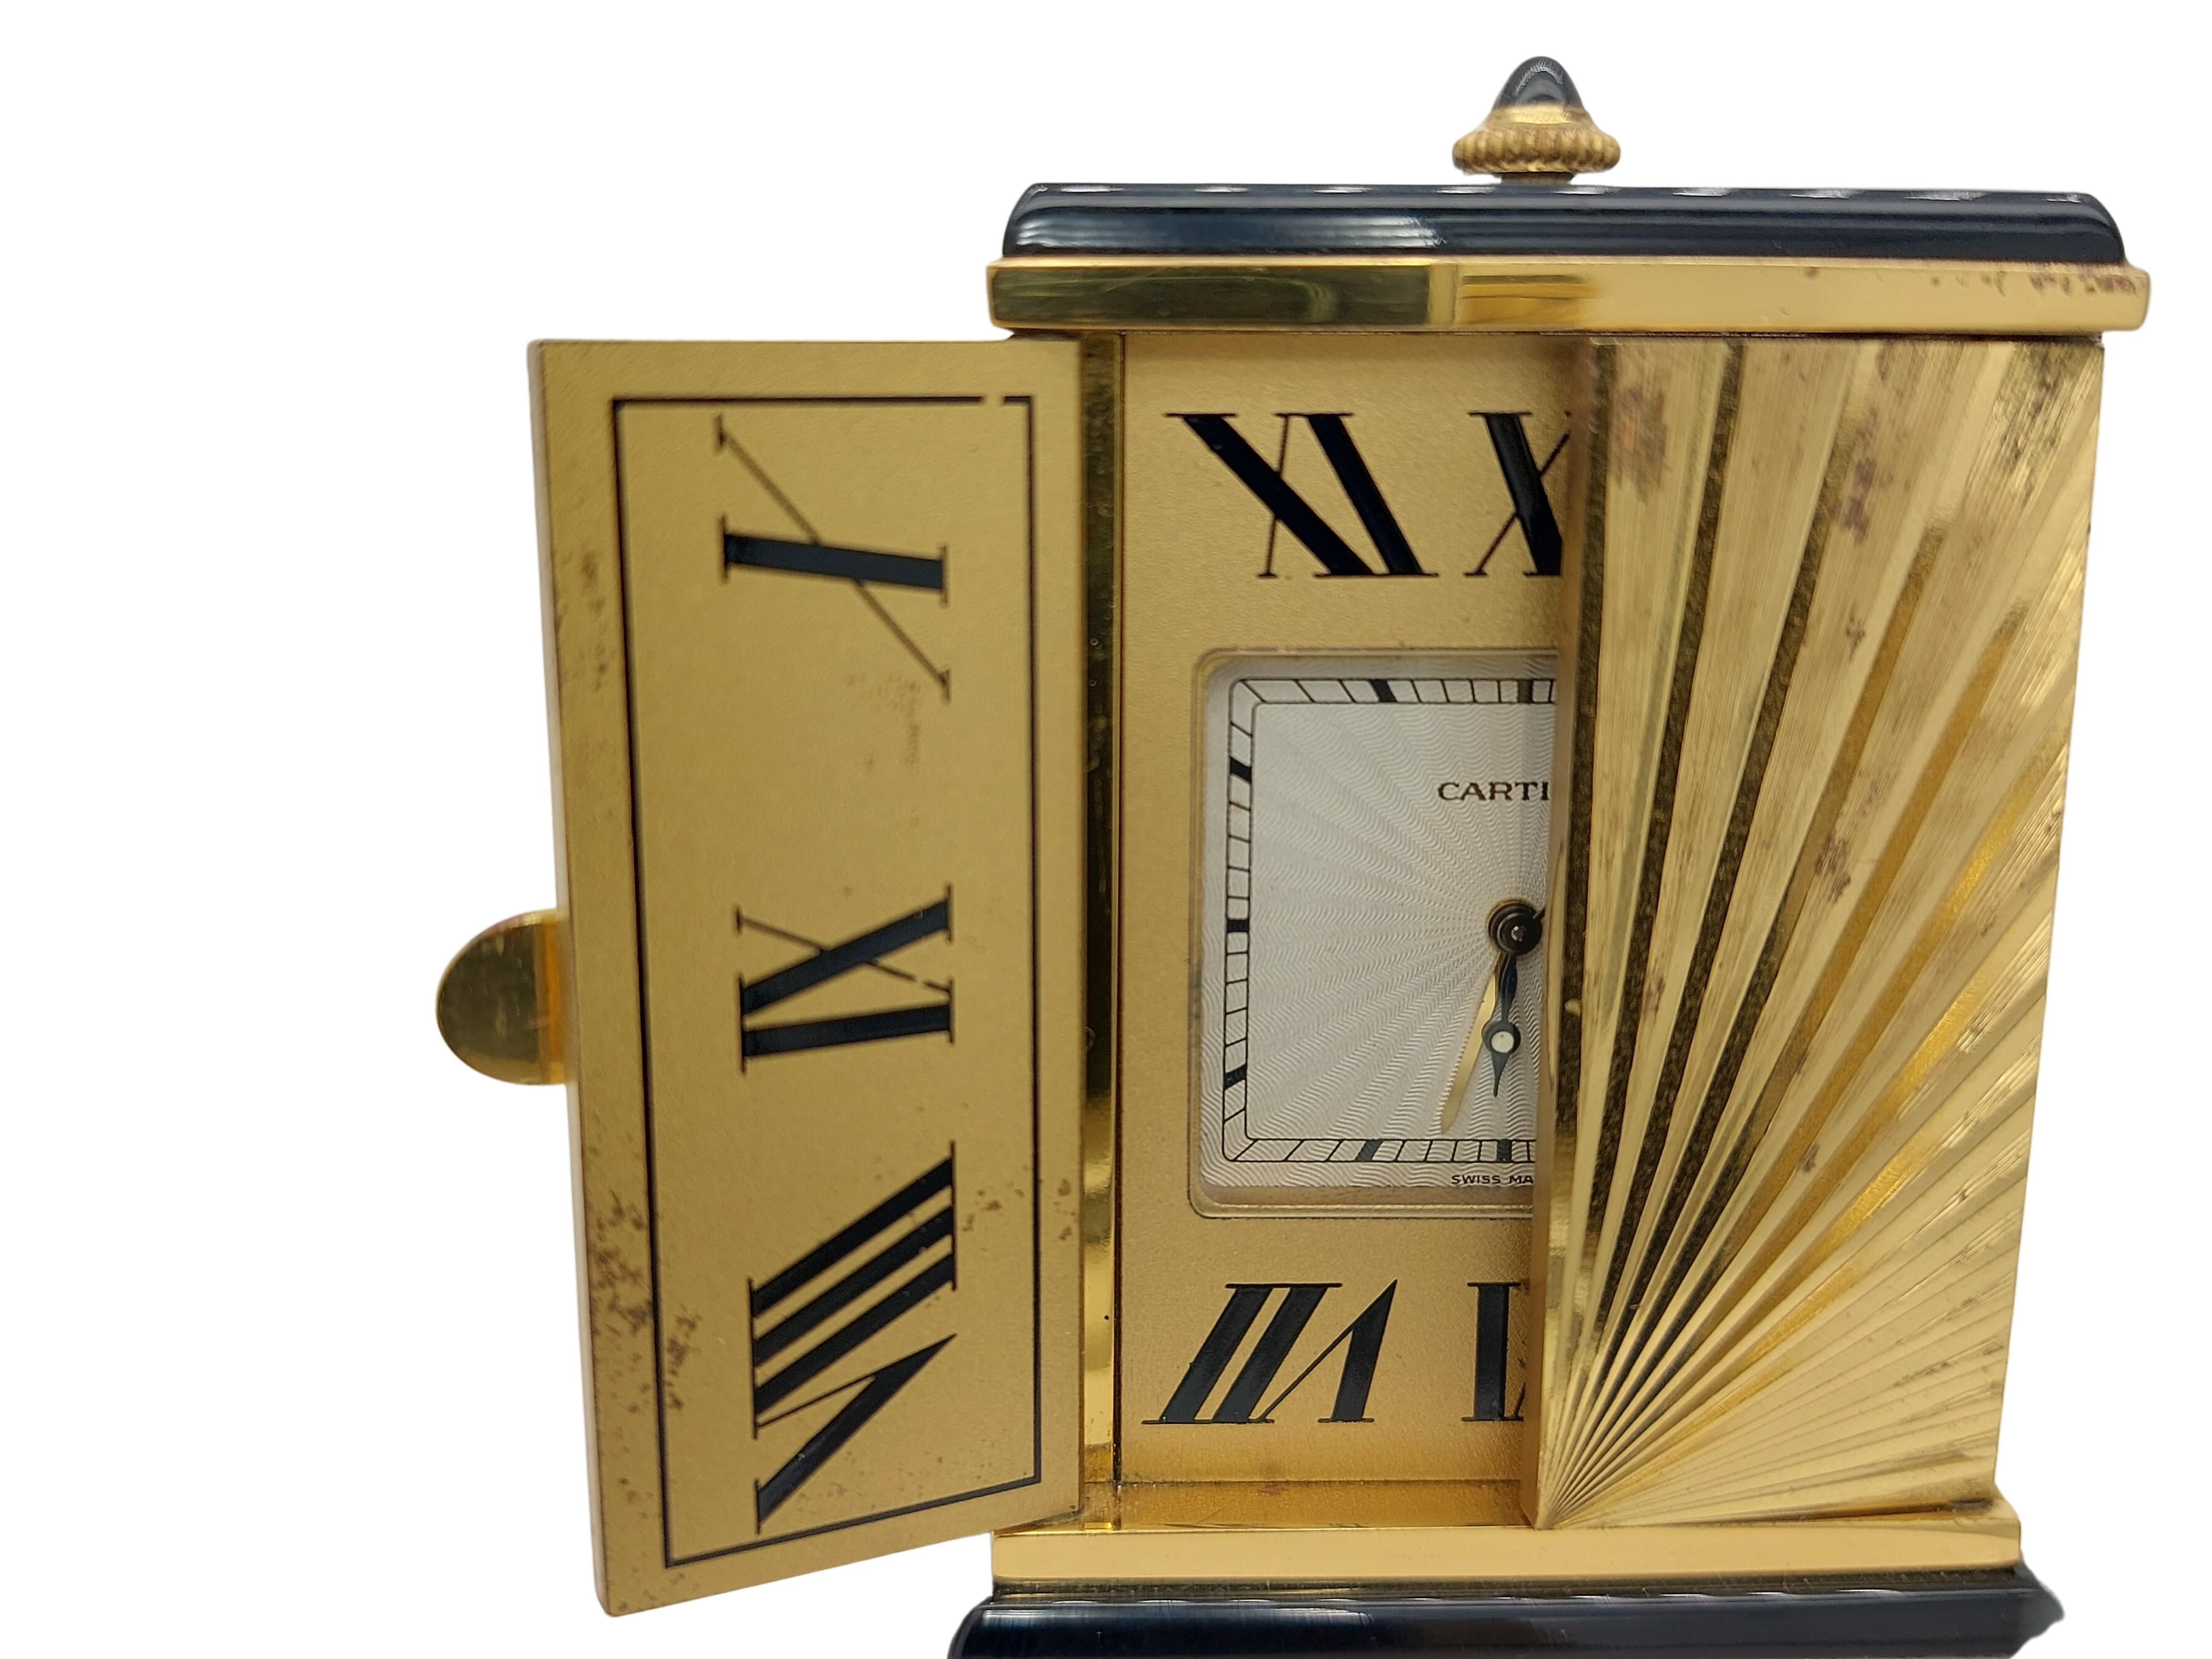 Artisan Must de Cartier Travel Clock, Quartz, Mounted in Onyx and Gold Plate, Signed